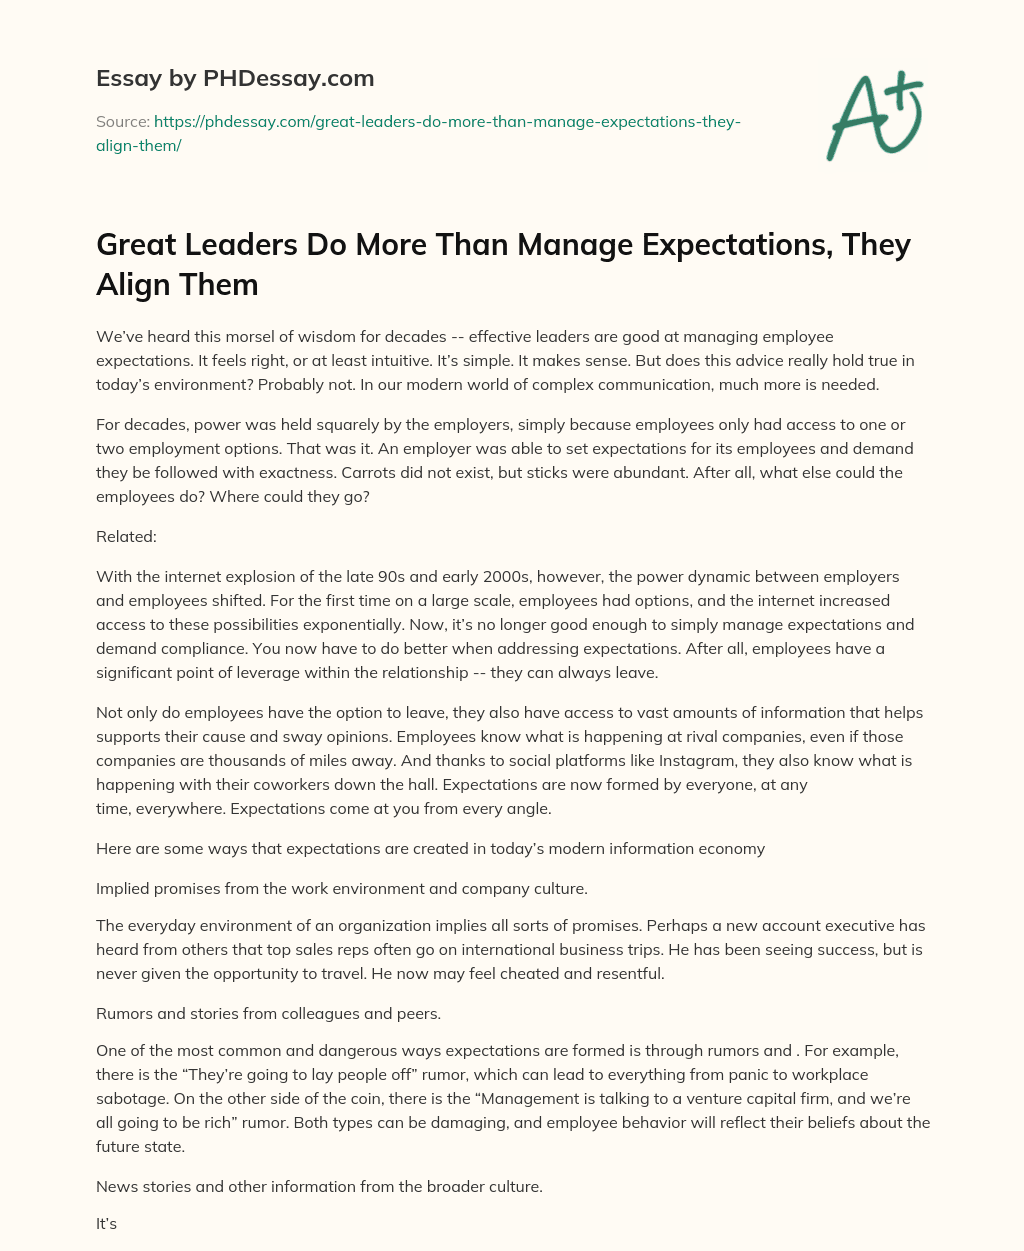 Great Leaders Do More Than Manage Expectations, They Align Them essay